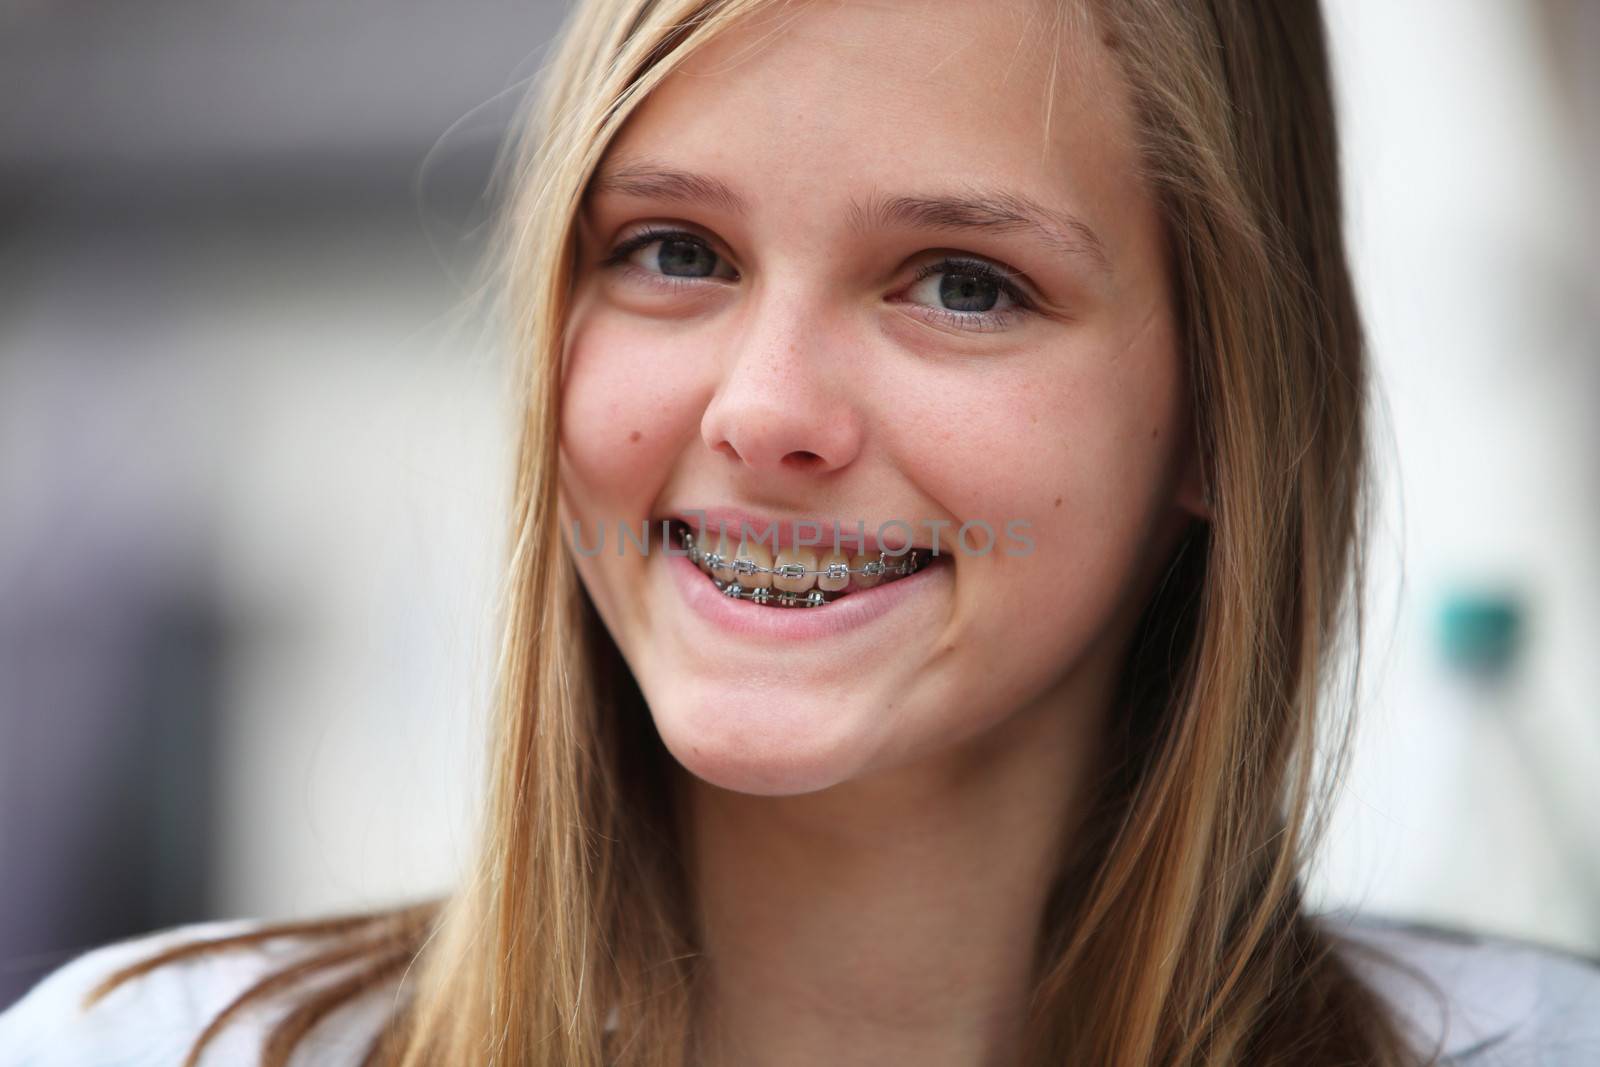 Young teenage girl with orthodontic braces by Farina6000